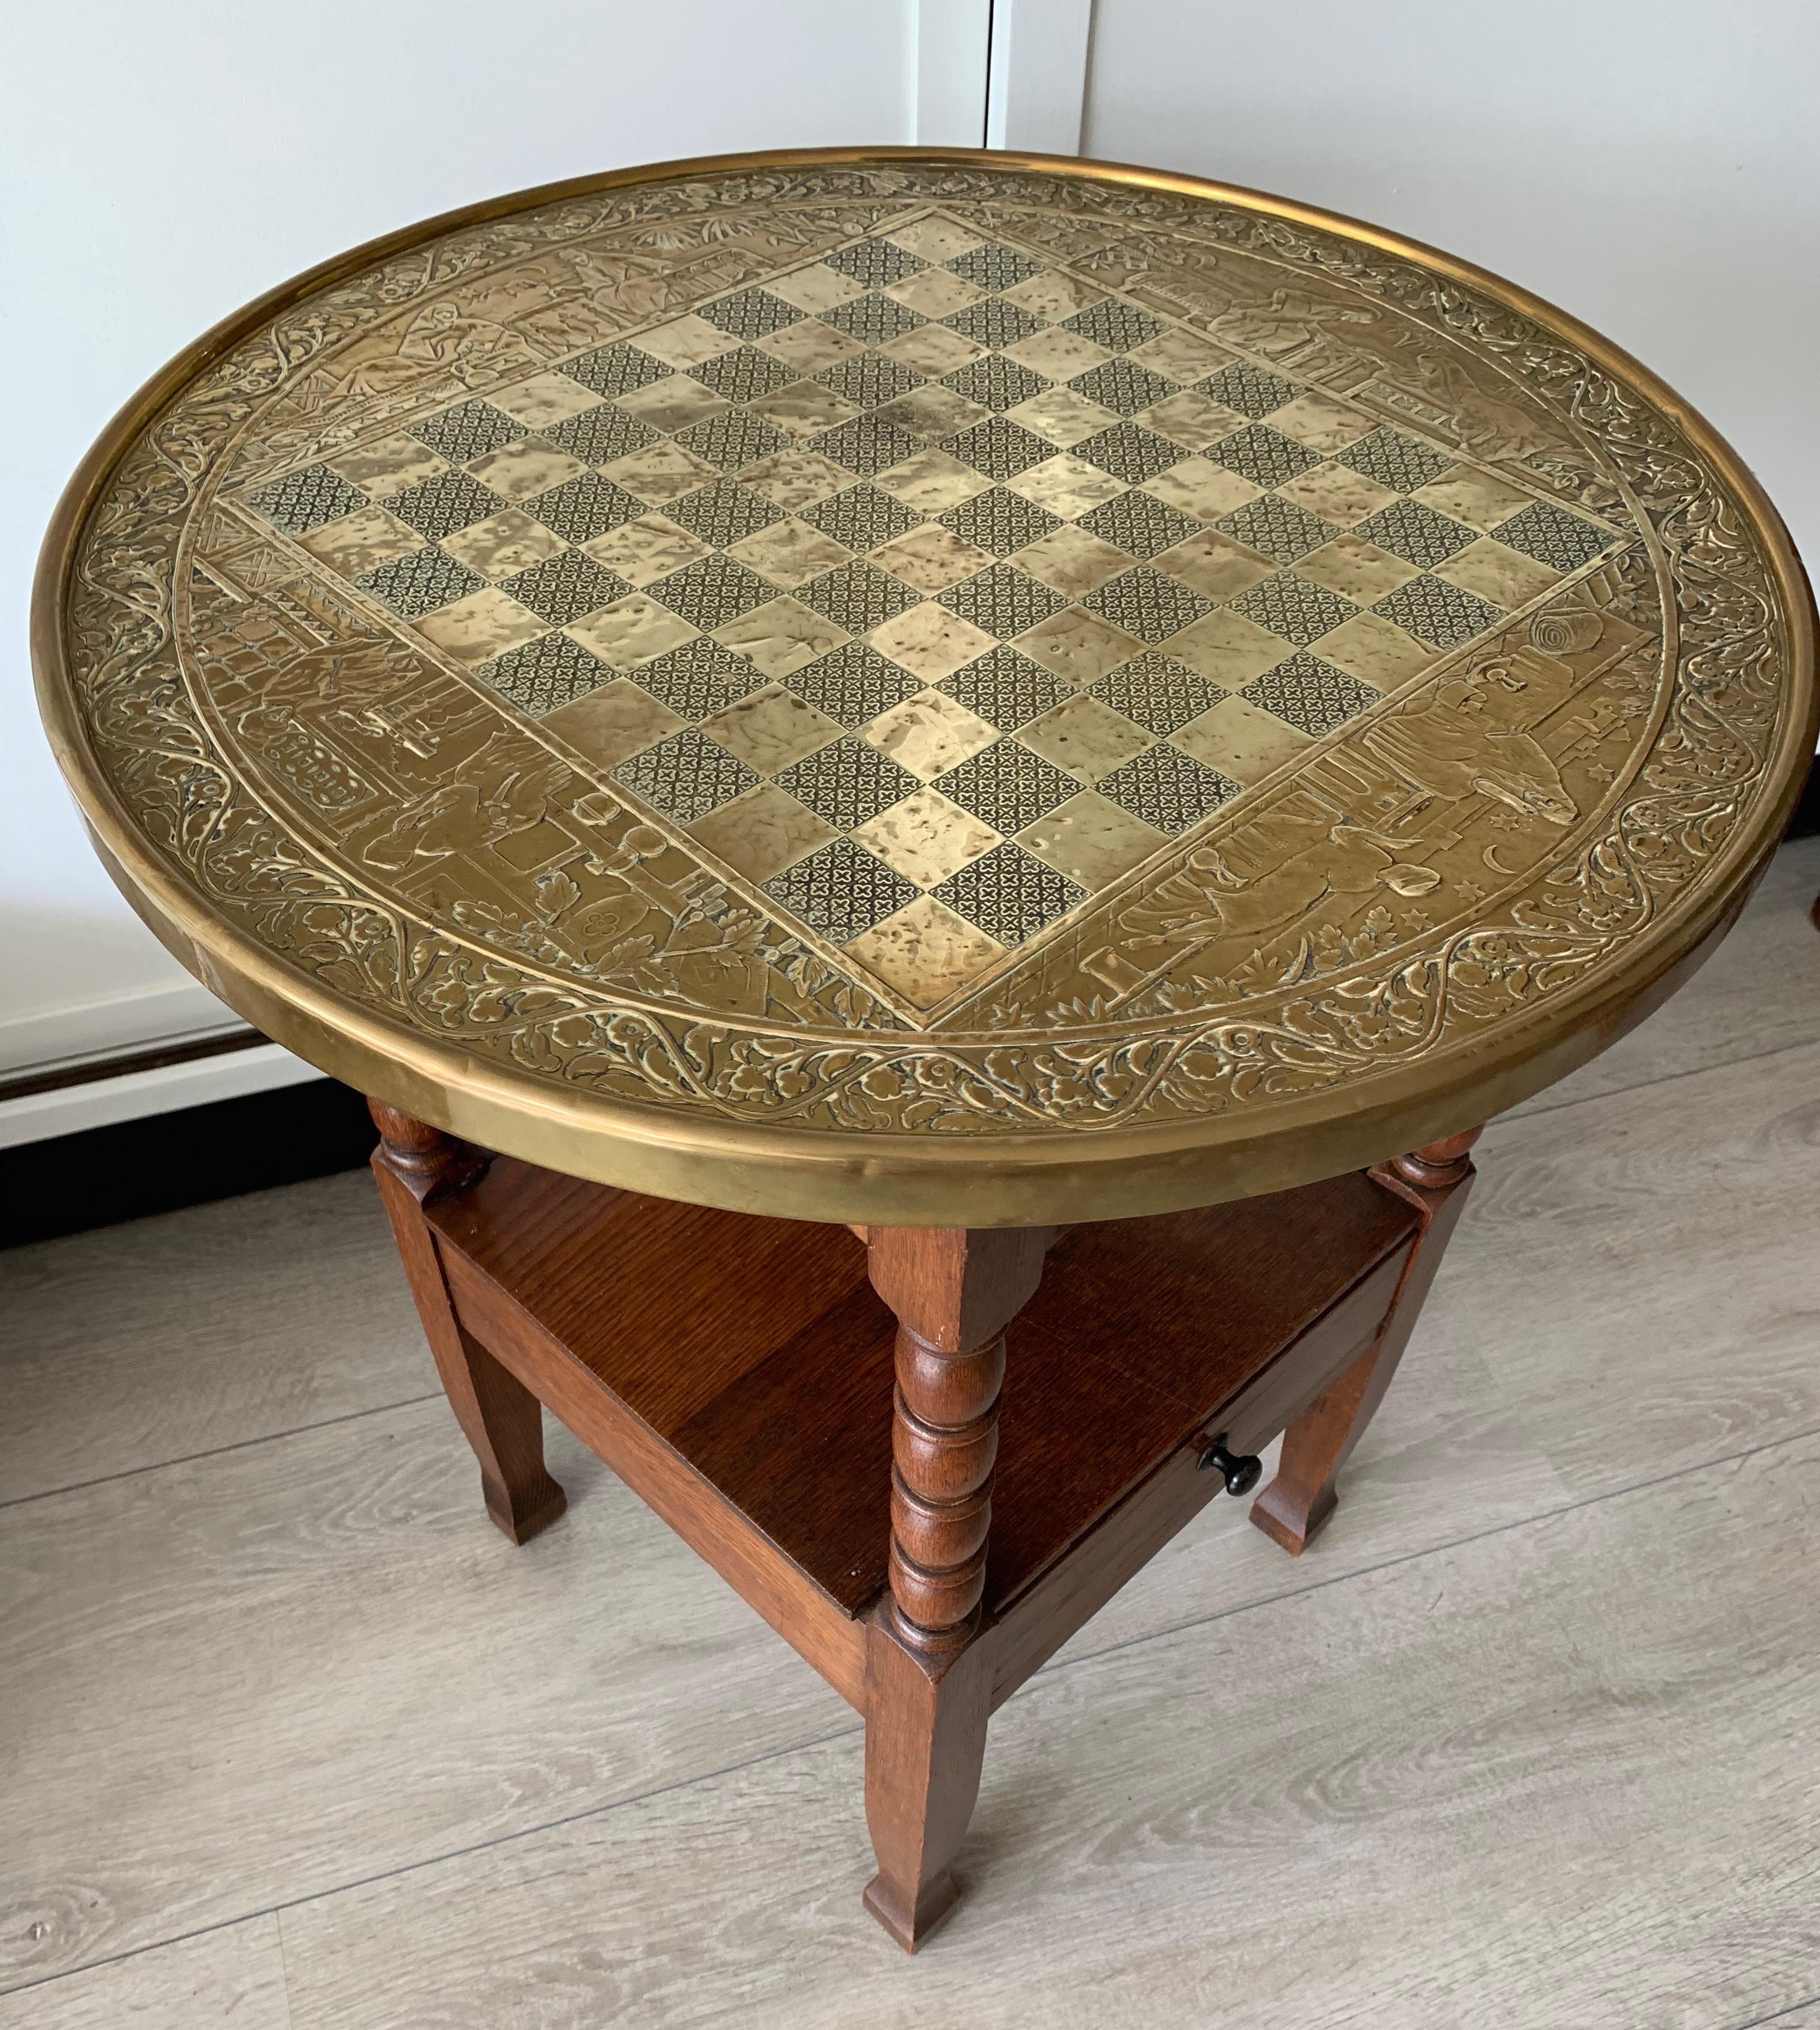 Early 1900s Dutch Arts & Crafts Checkers/Draughts Table with Embossed Brass Top 6